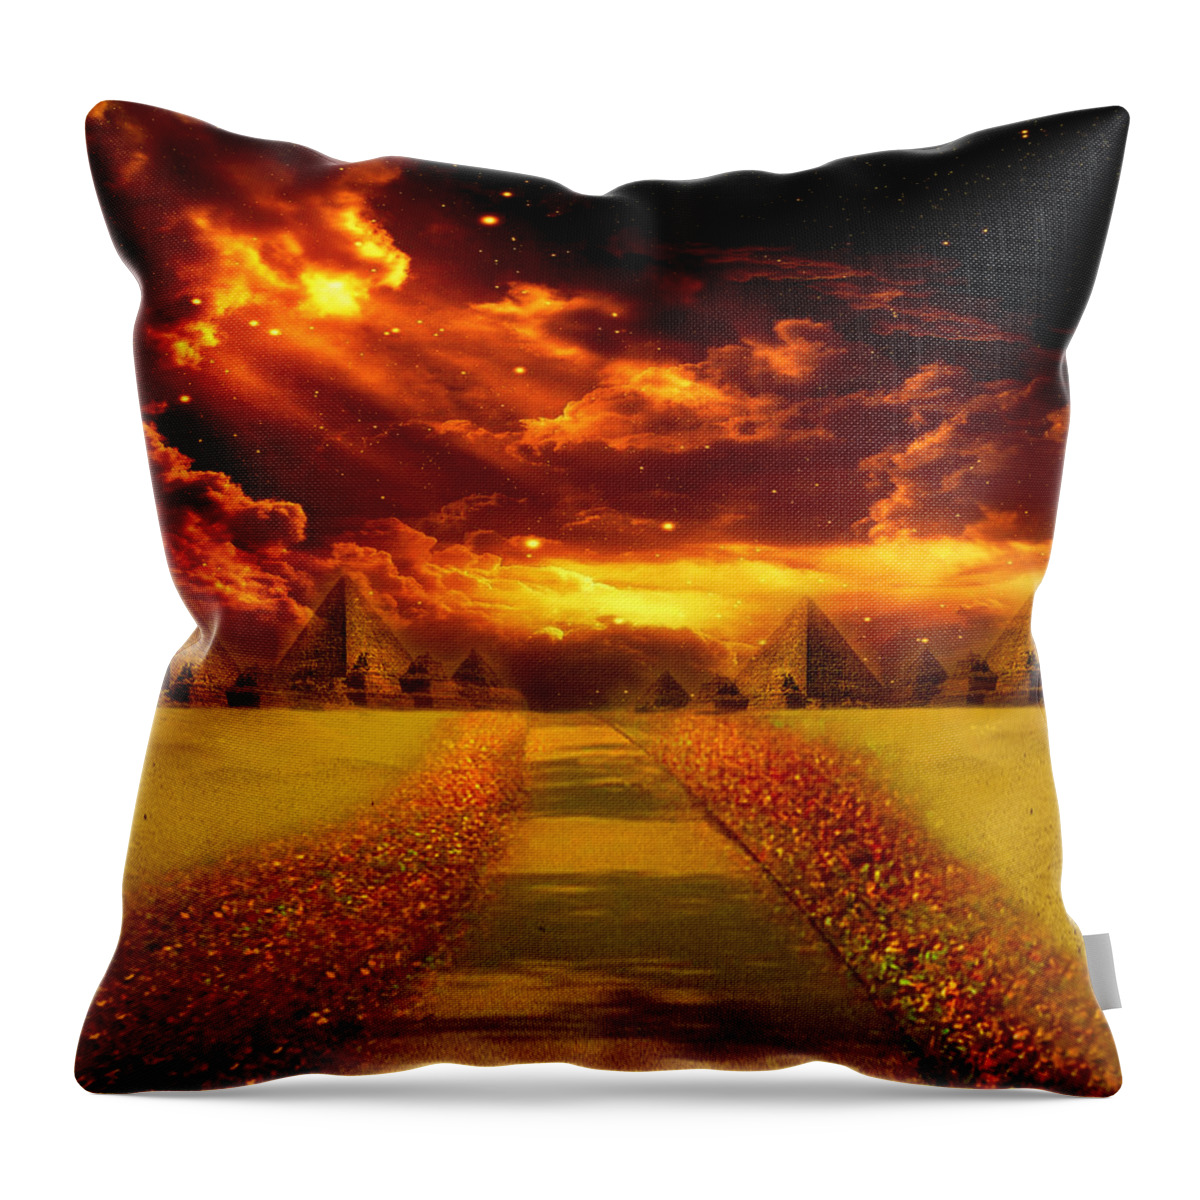 Digital Throw Pillow featuring the digital art There's Always A Way by Ester McGuire